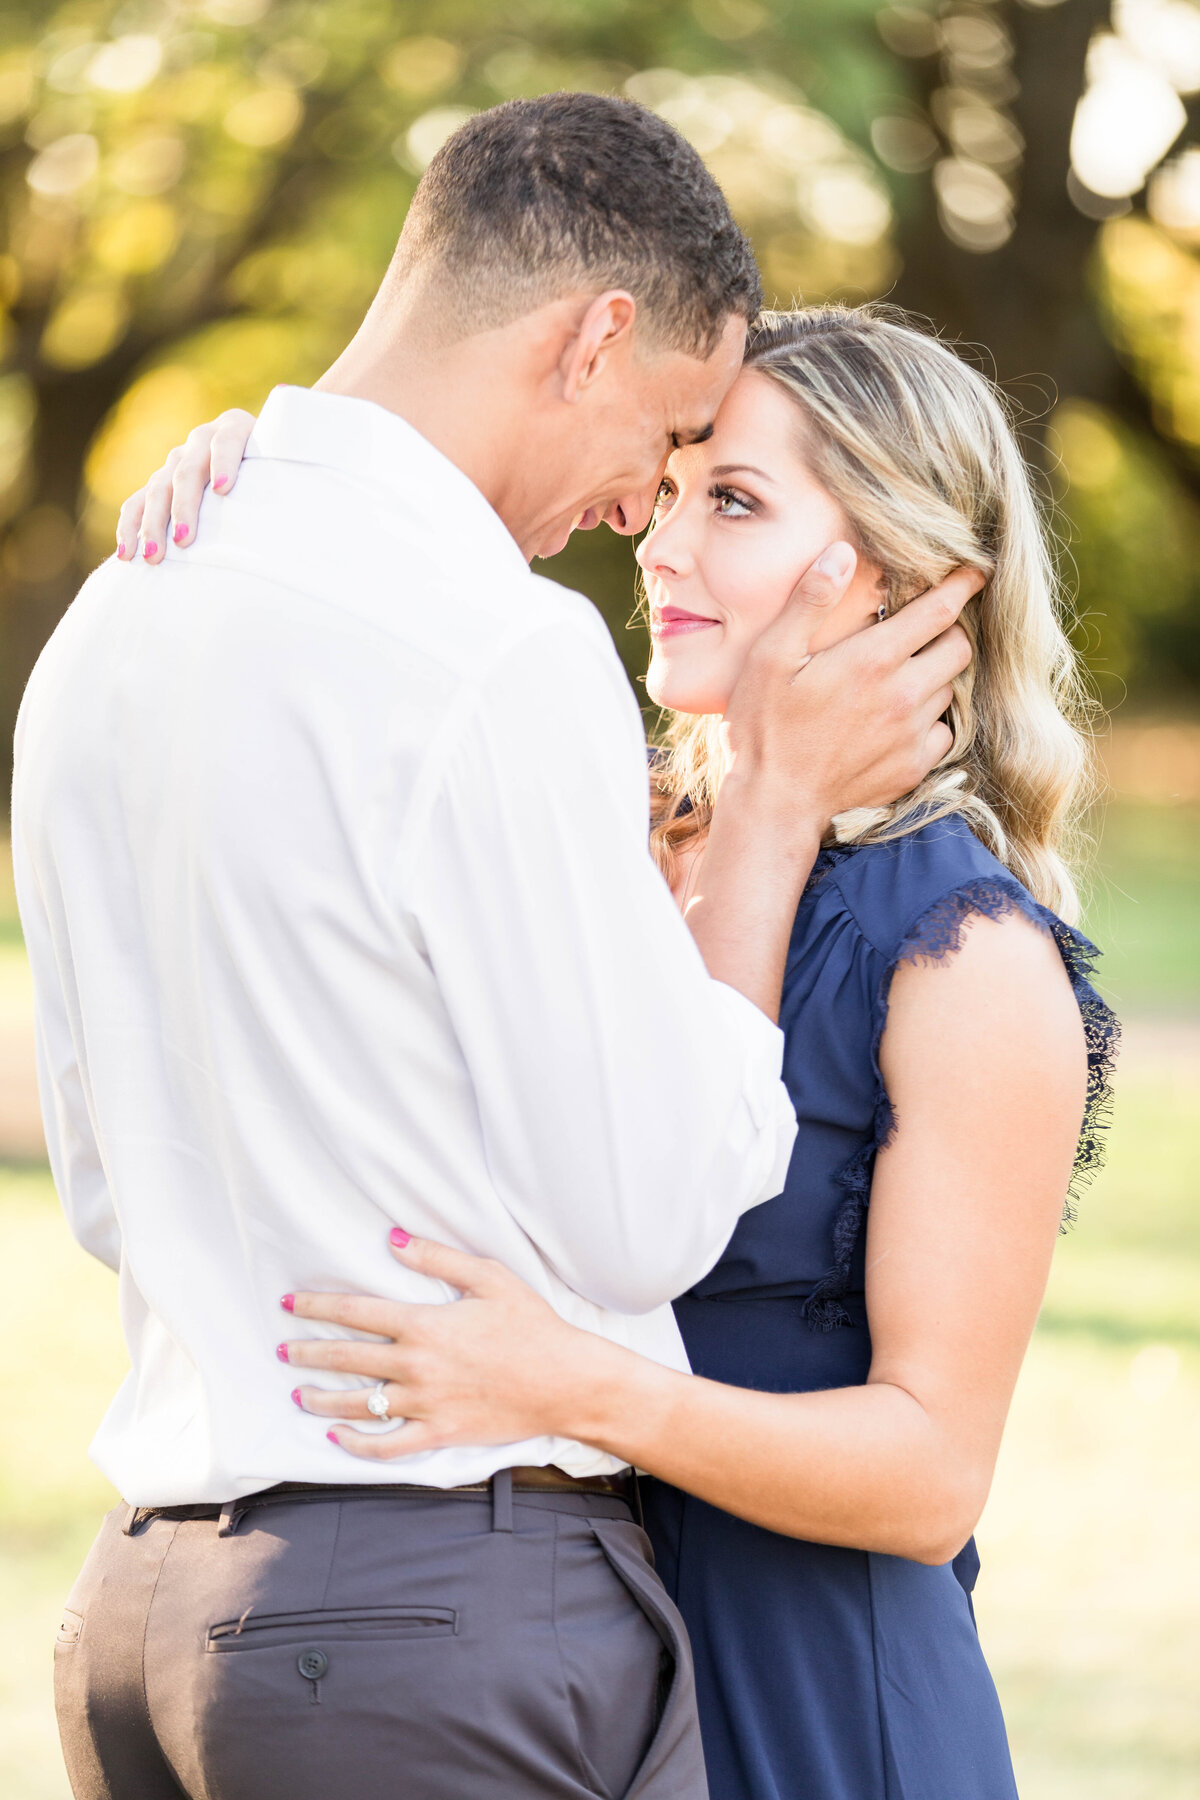 Light and Airy Engagement Session at A.W. Perry